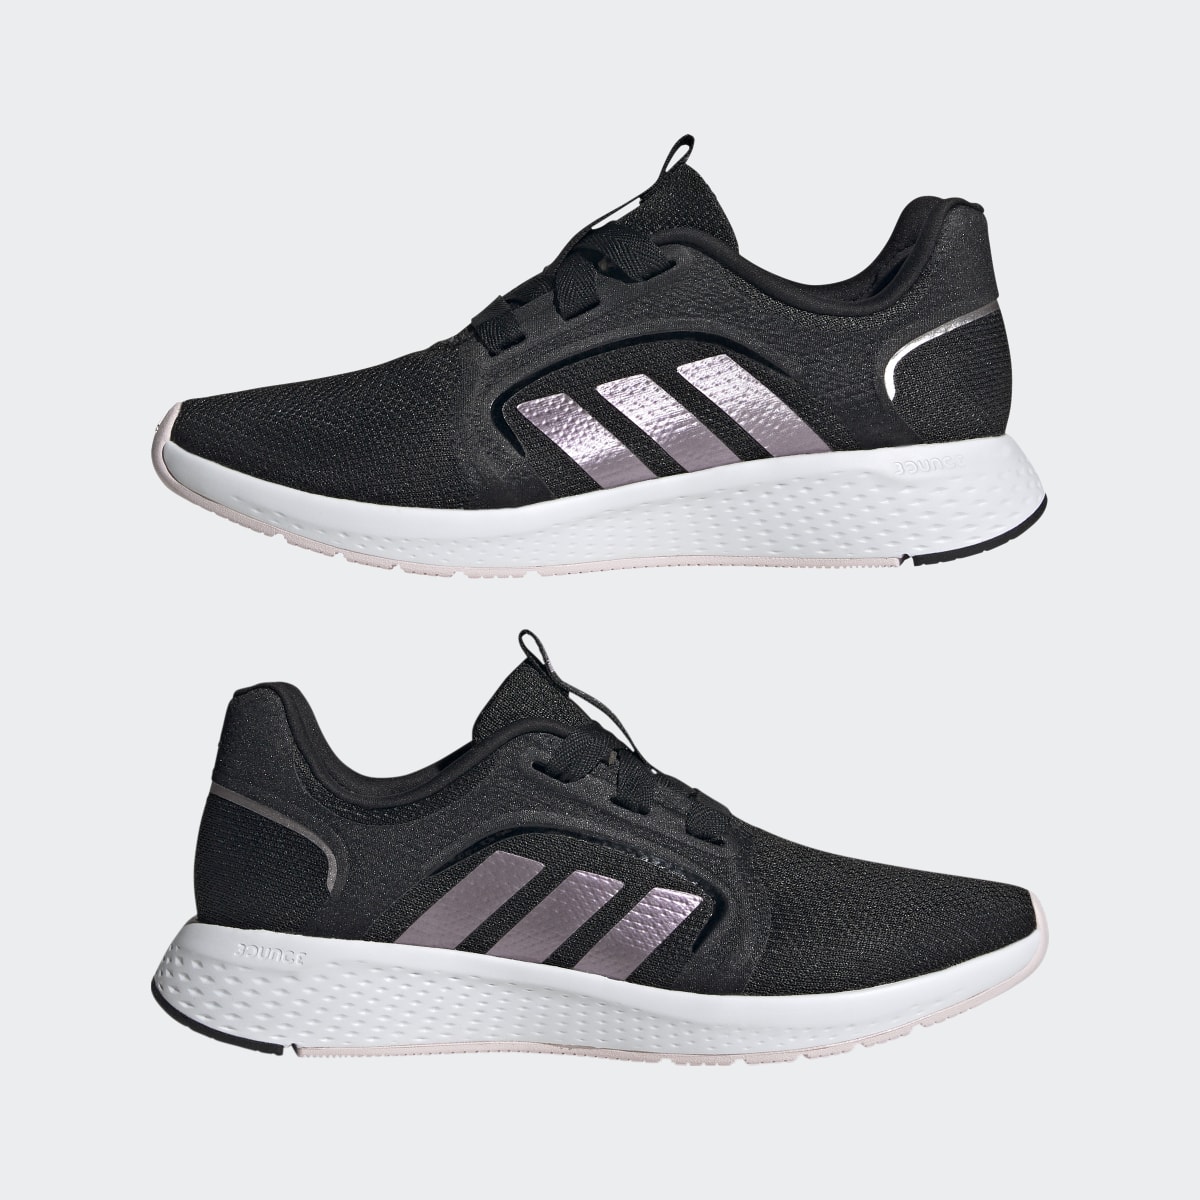 Adidas Edge Lux Shoes. 8